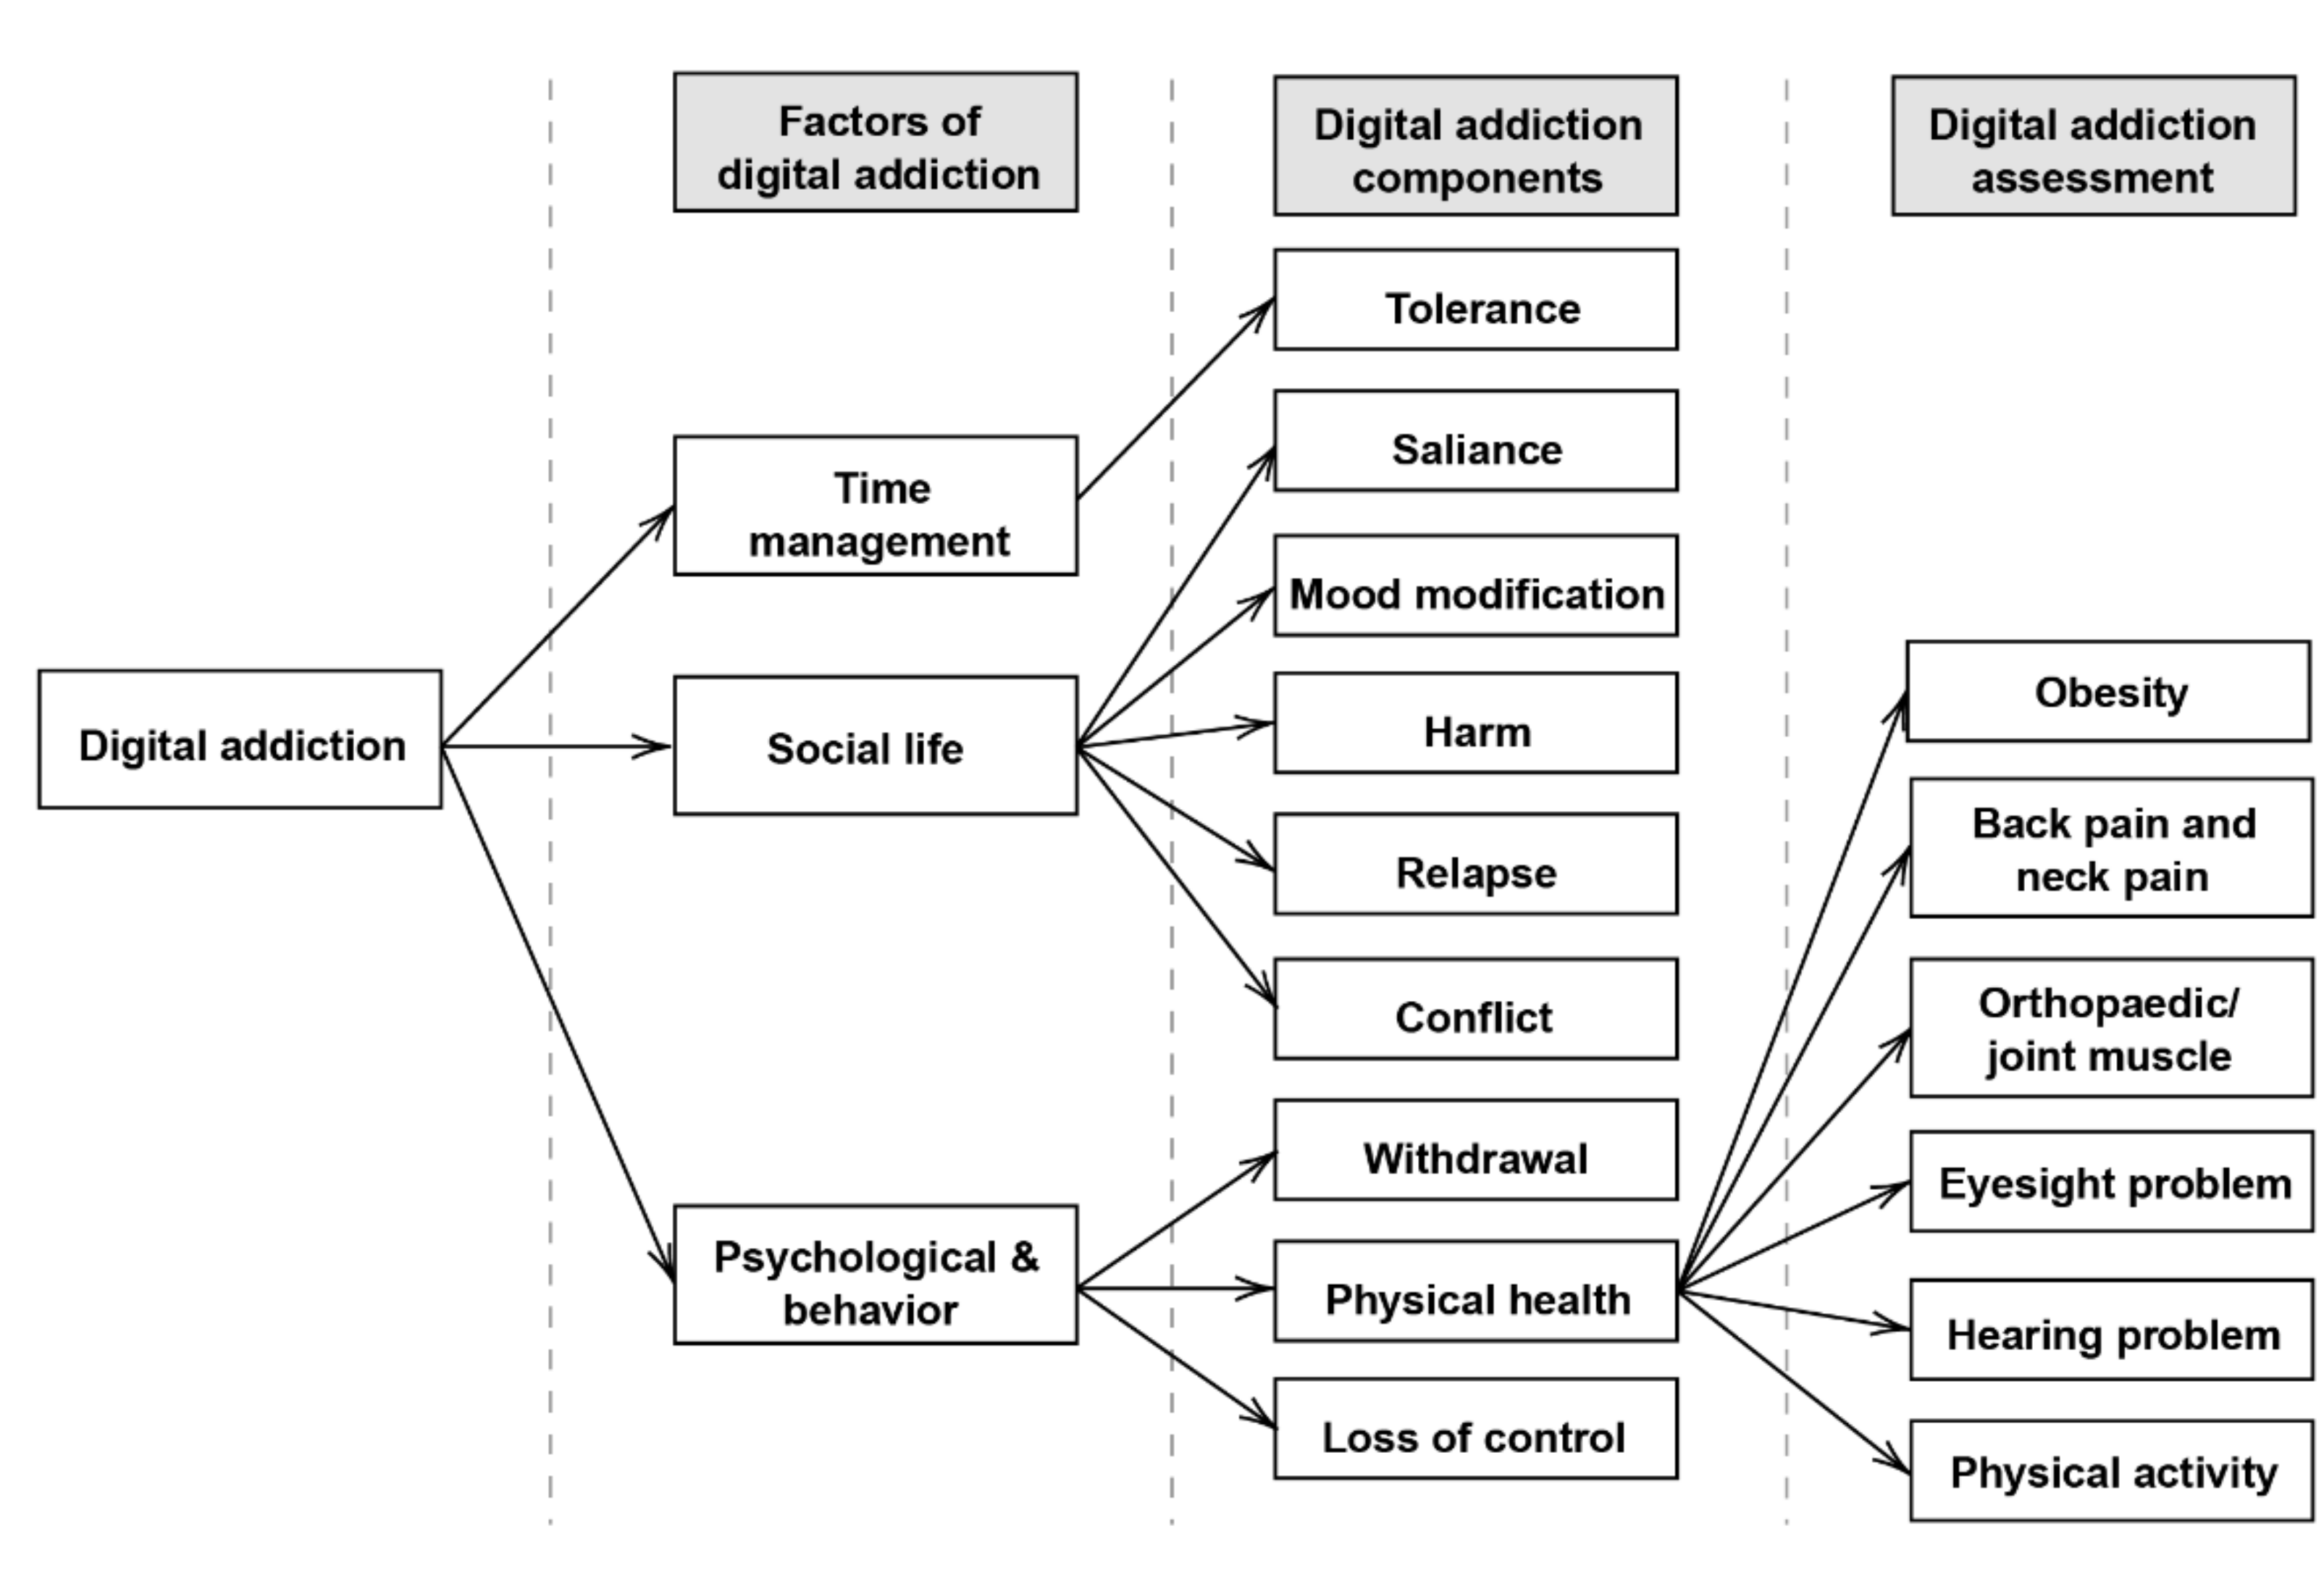 research hypothesis of online games addiction